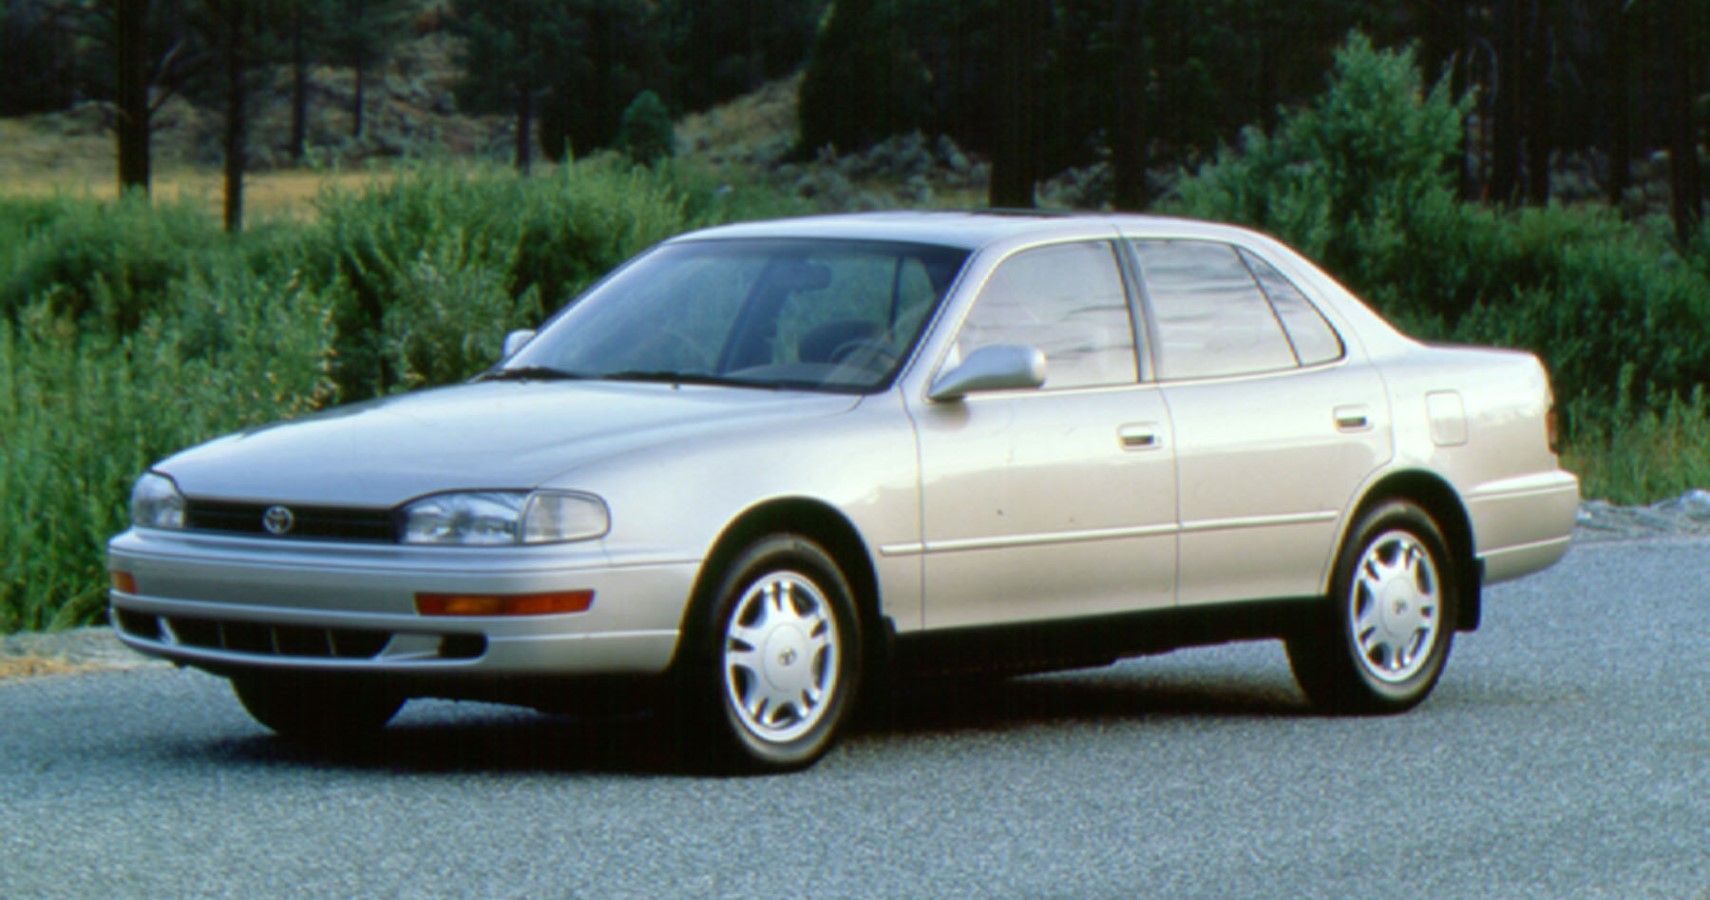 1994 Toyota Camry front third quarter view